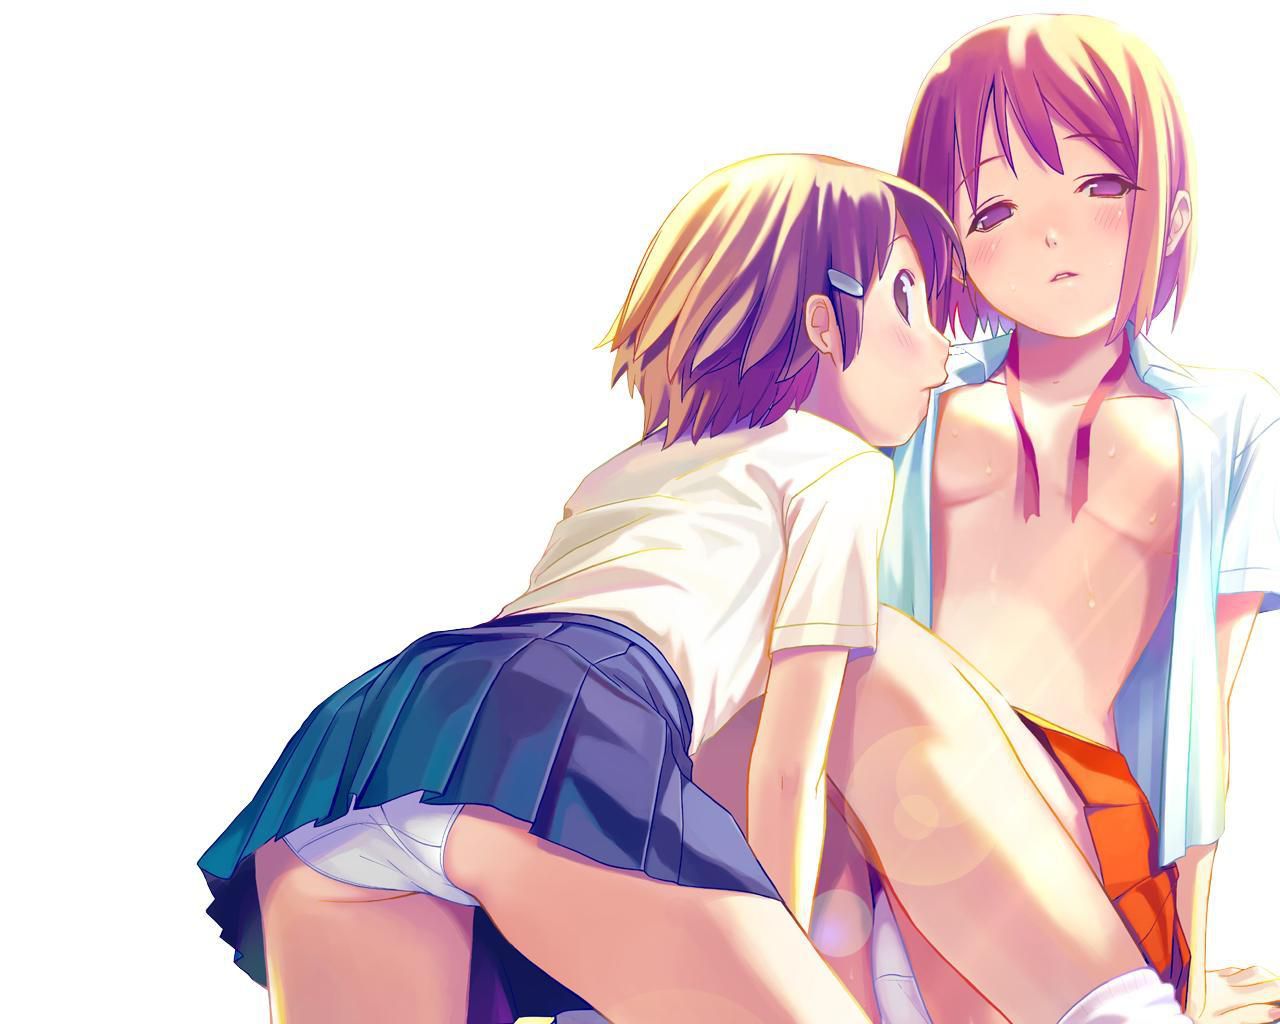 Forbidden Men!! The second erotic image of beautiful yuri and lesbian wwww part4 8